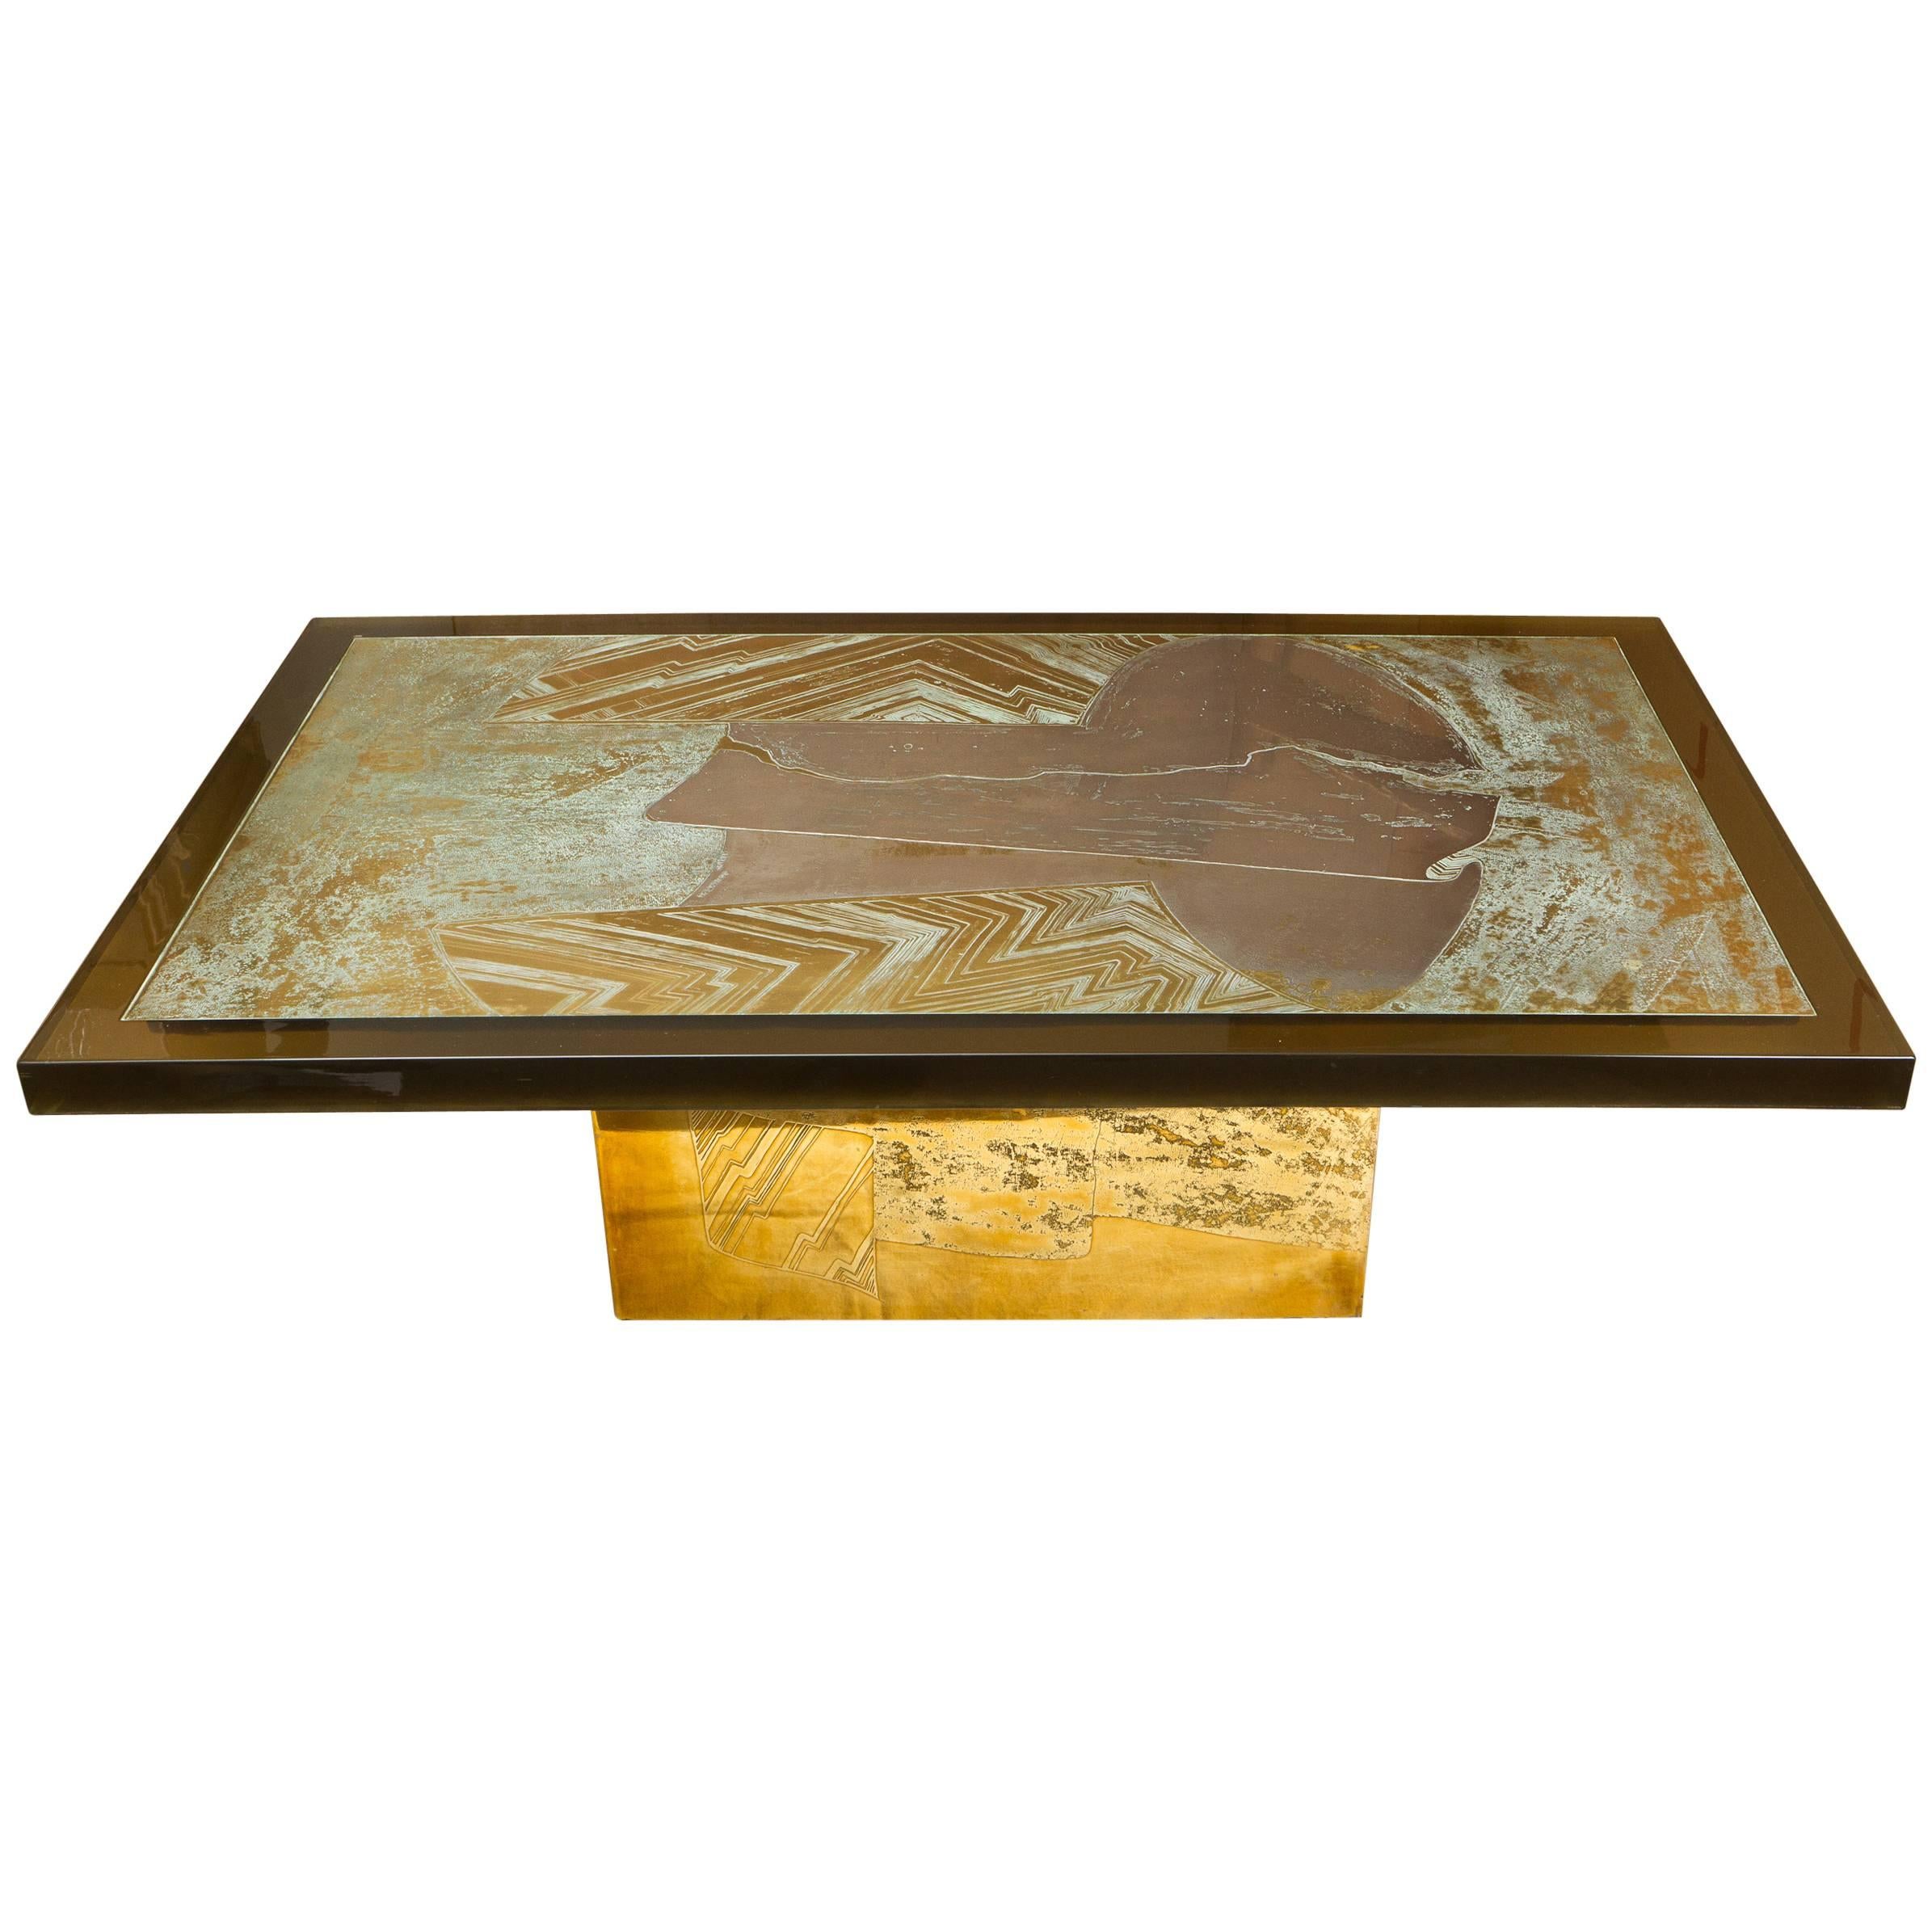 Stunning Acid Etched Brass Coffee Table "Abstraction" by Armand Jonckers